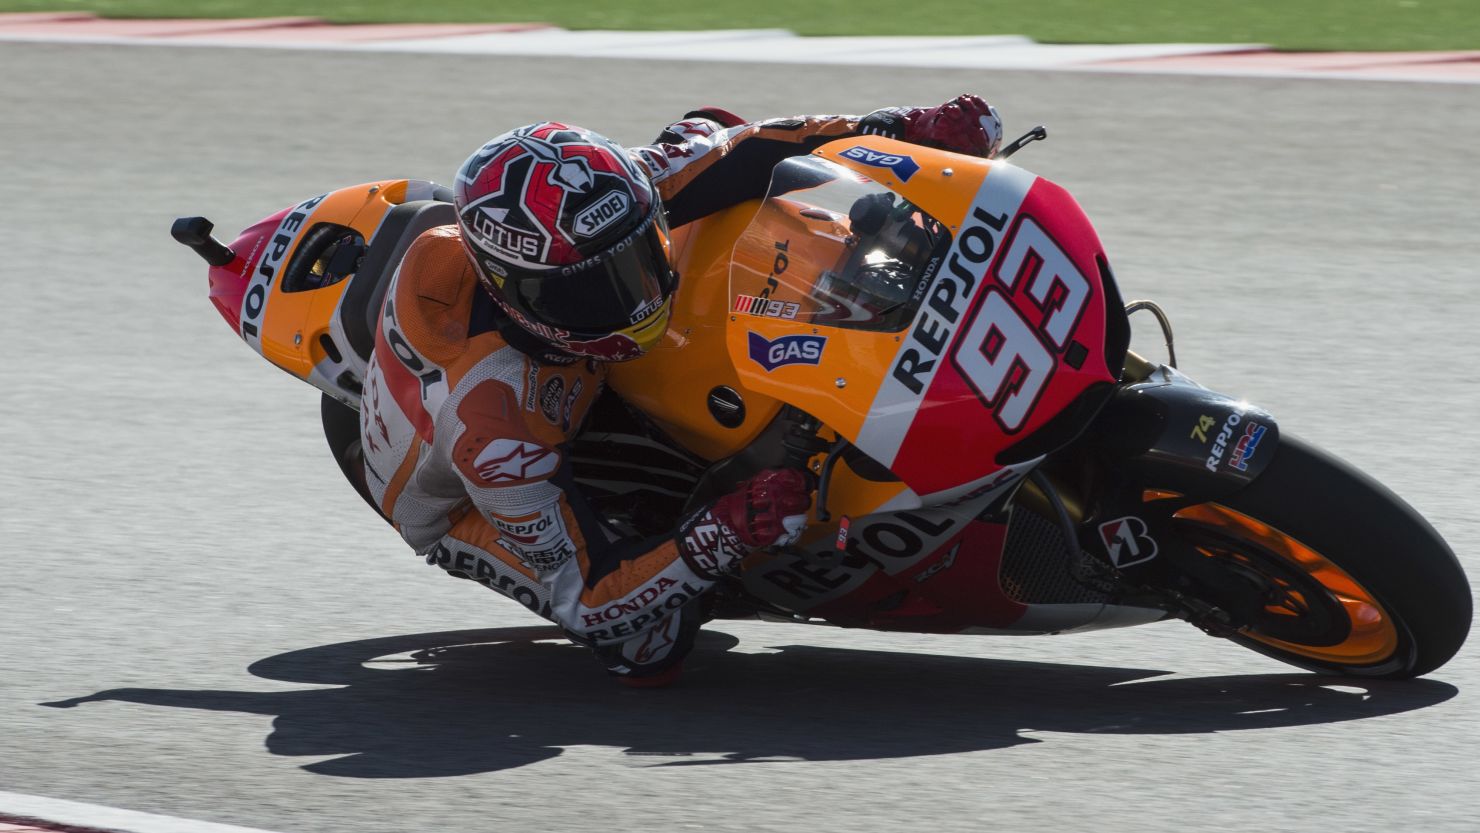 Spanish motorcyclist Marc Marquez is making a big impression in his rookie MotoGP season with Repsol Honda.